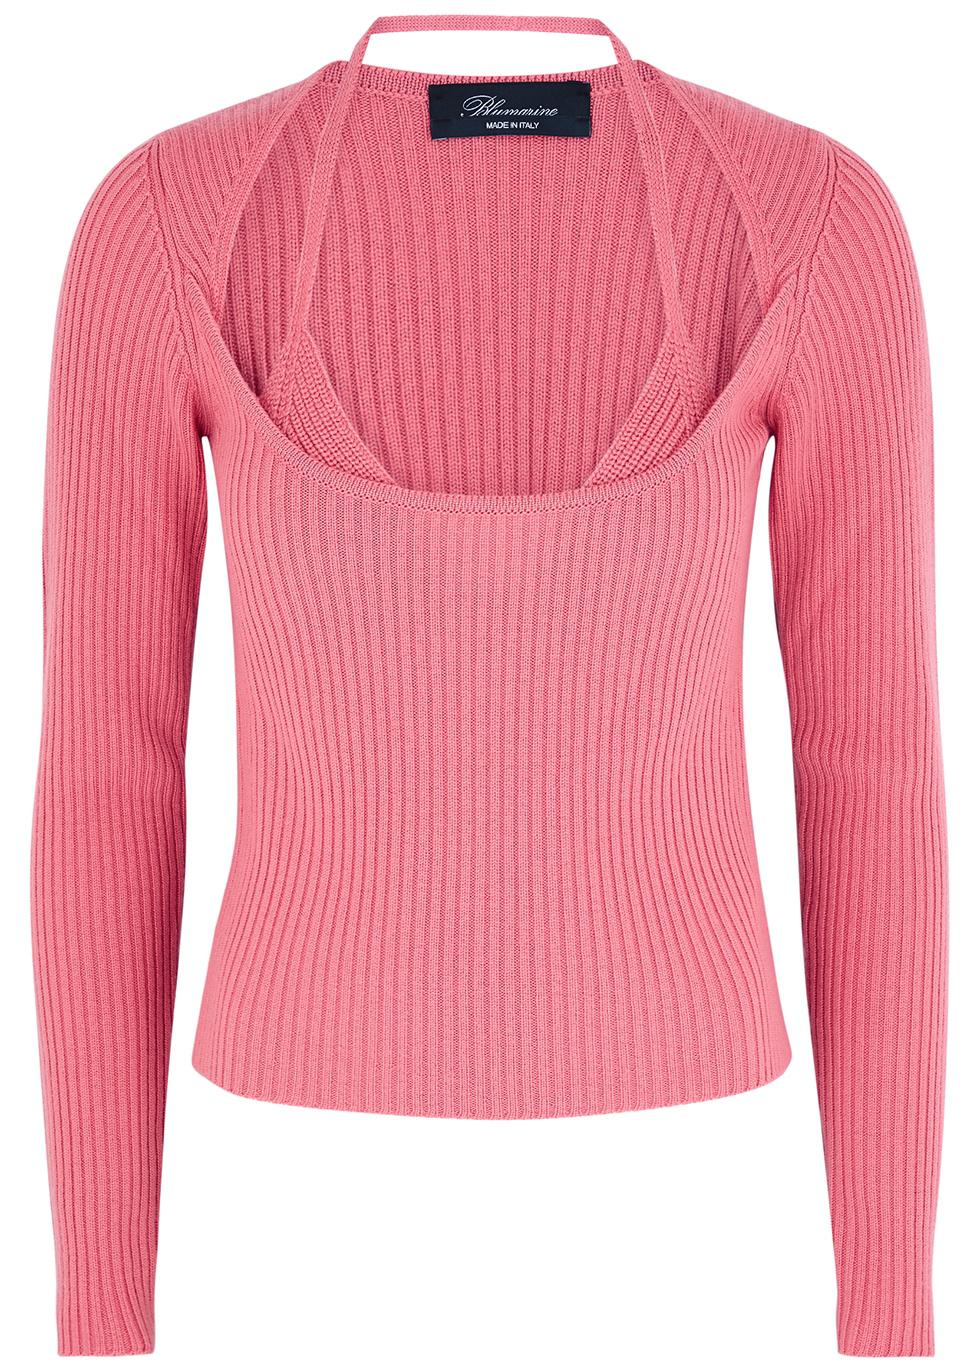 Ribbed wool jumper and bralette set by BLUMARINE